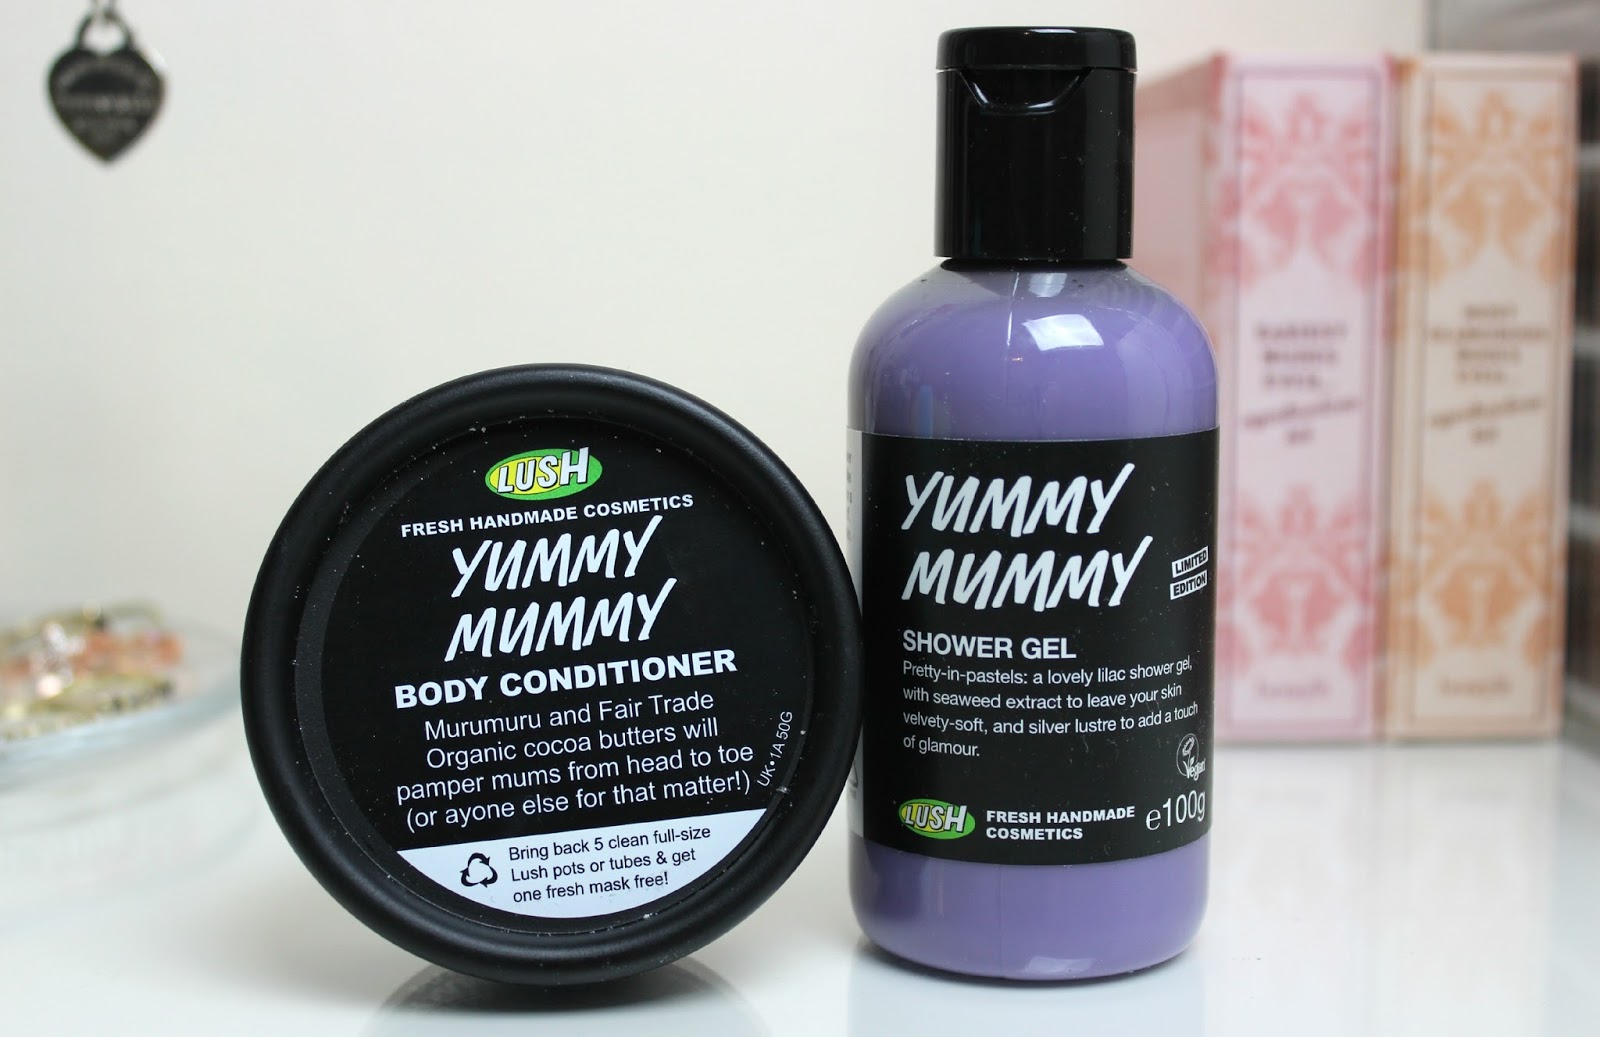 A picture of Lush Yummy Mummy Shower Gel and Yummy Mummy Body Conditioner